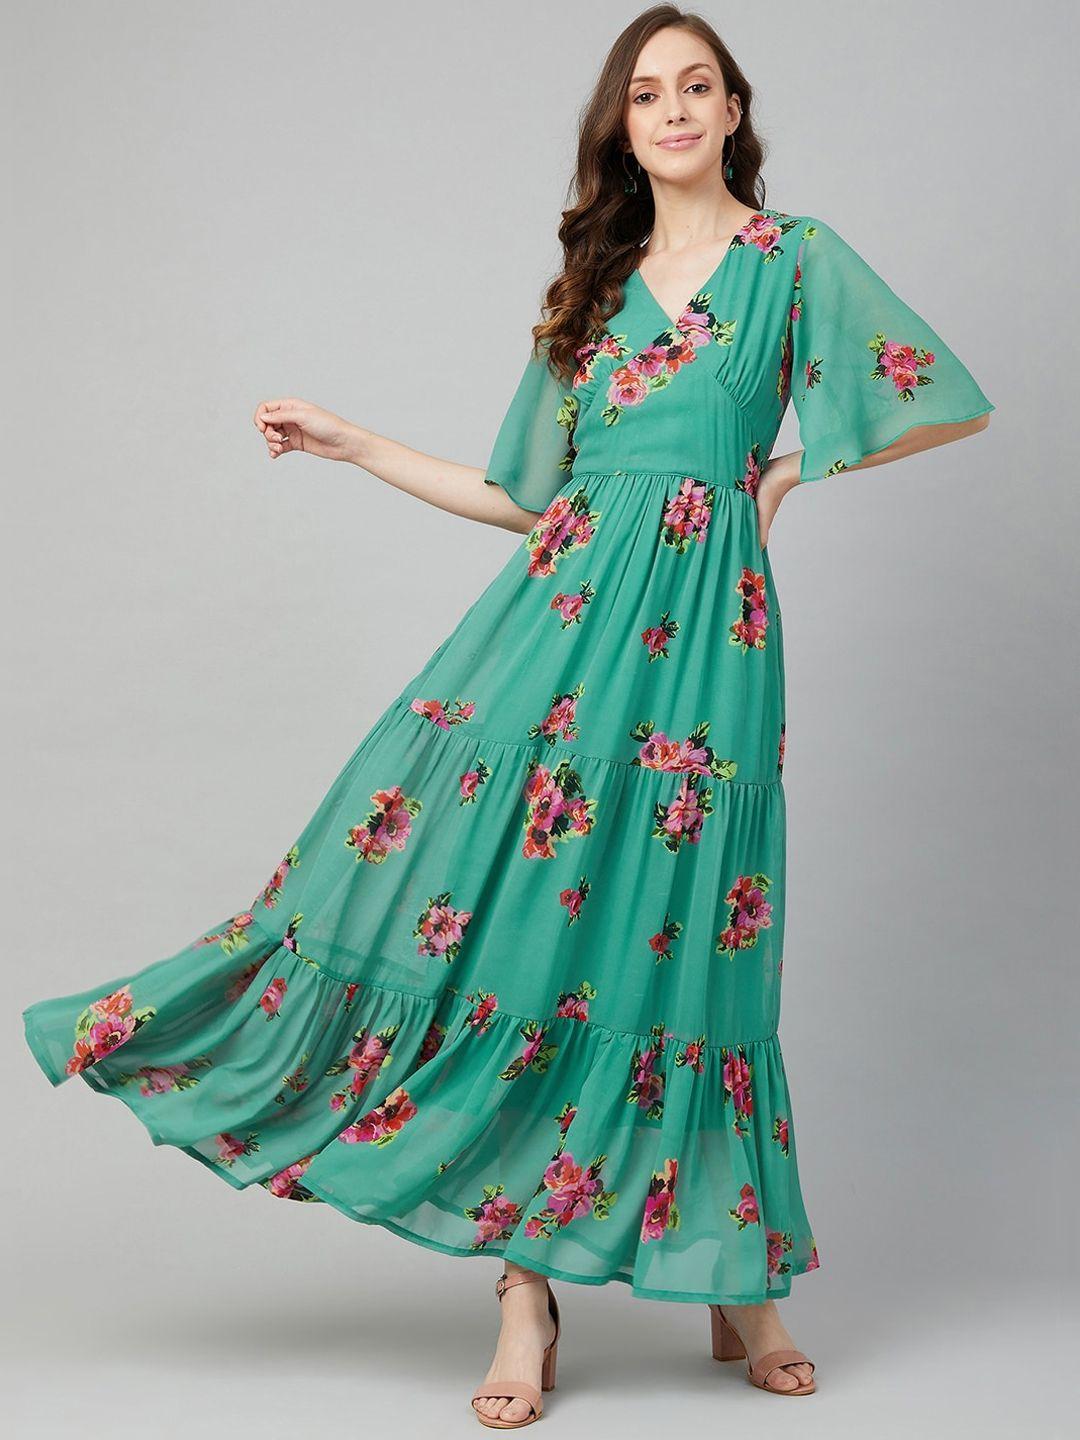 rare-women-green-&-red-floral-printed-maxi-dress-with-flared-sleeves